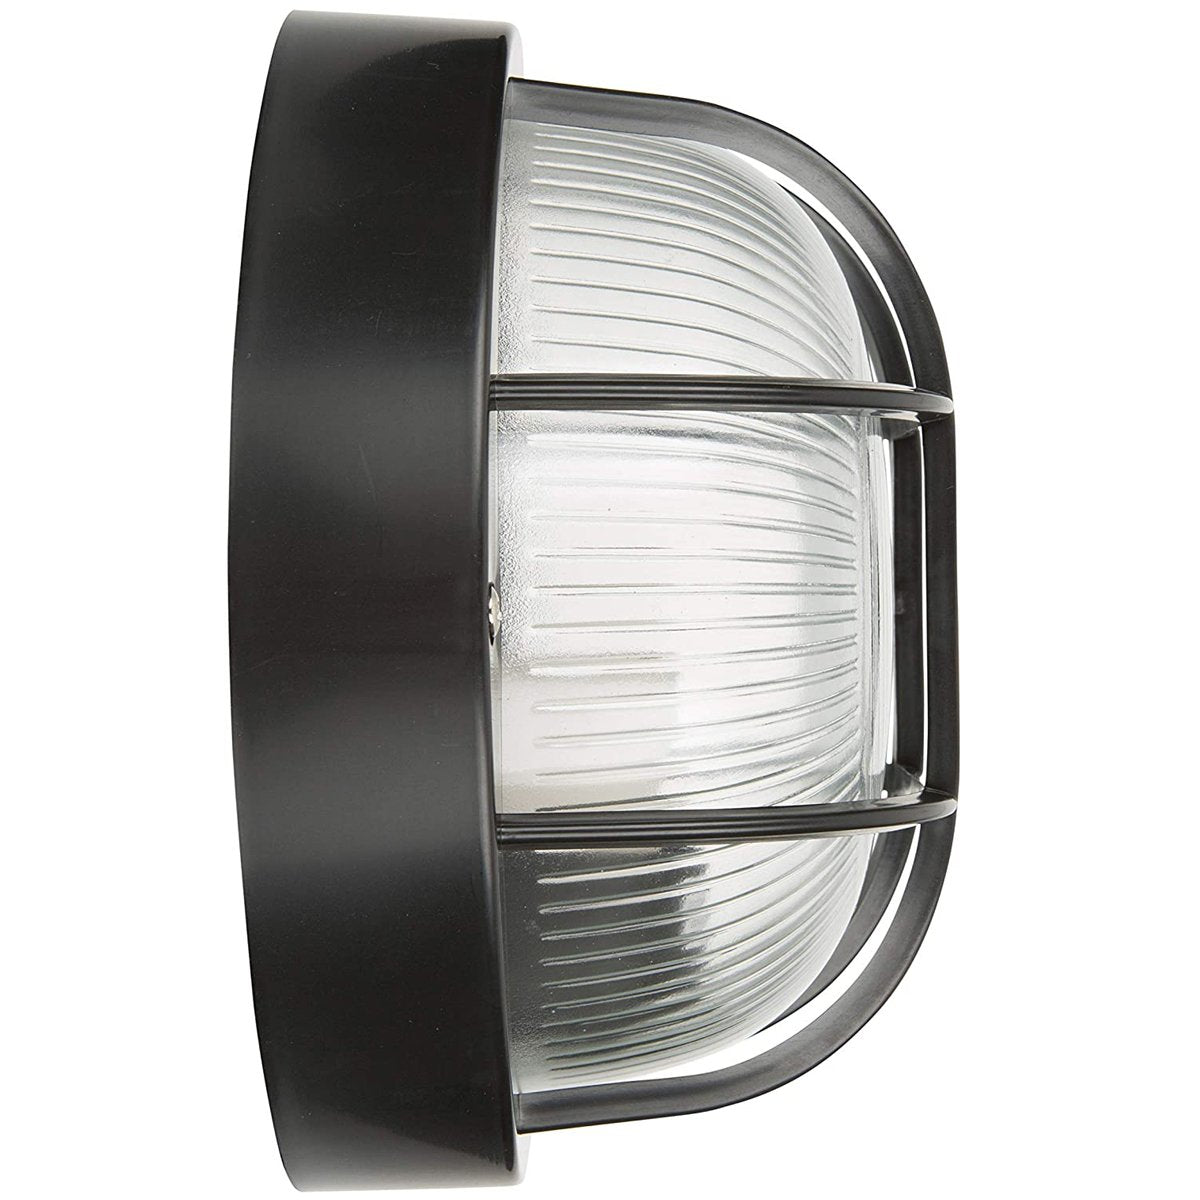 Ronnie cage round bulkhead is an optimal choice for illuminating doorways, patios, porches, driveways, garages, and sheds. Crafted of durable plastic with a glass prismatic diffuser, it offers a timeless aesthetic with reliable performance.